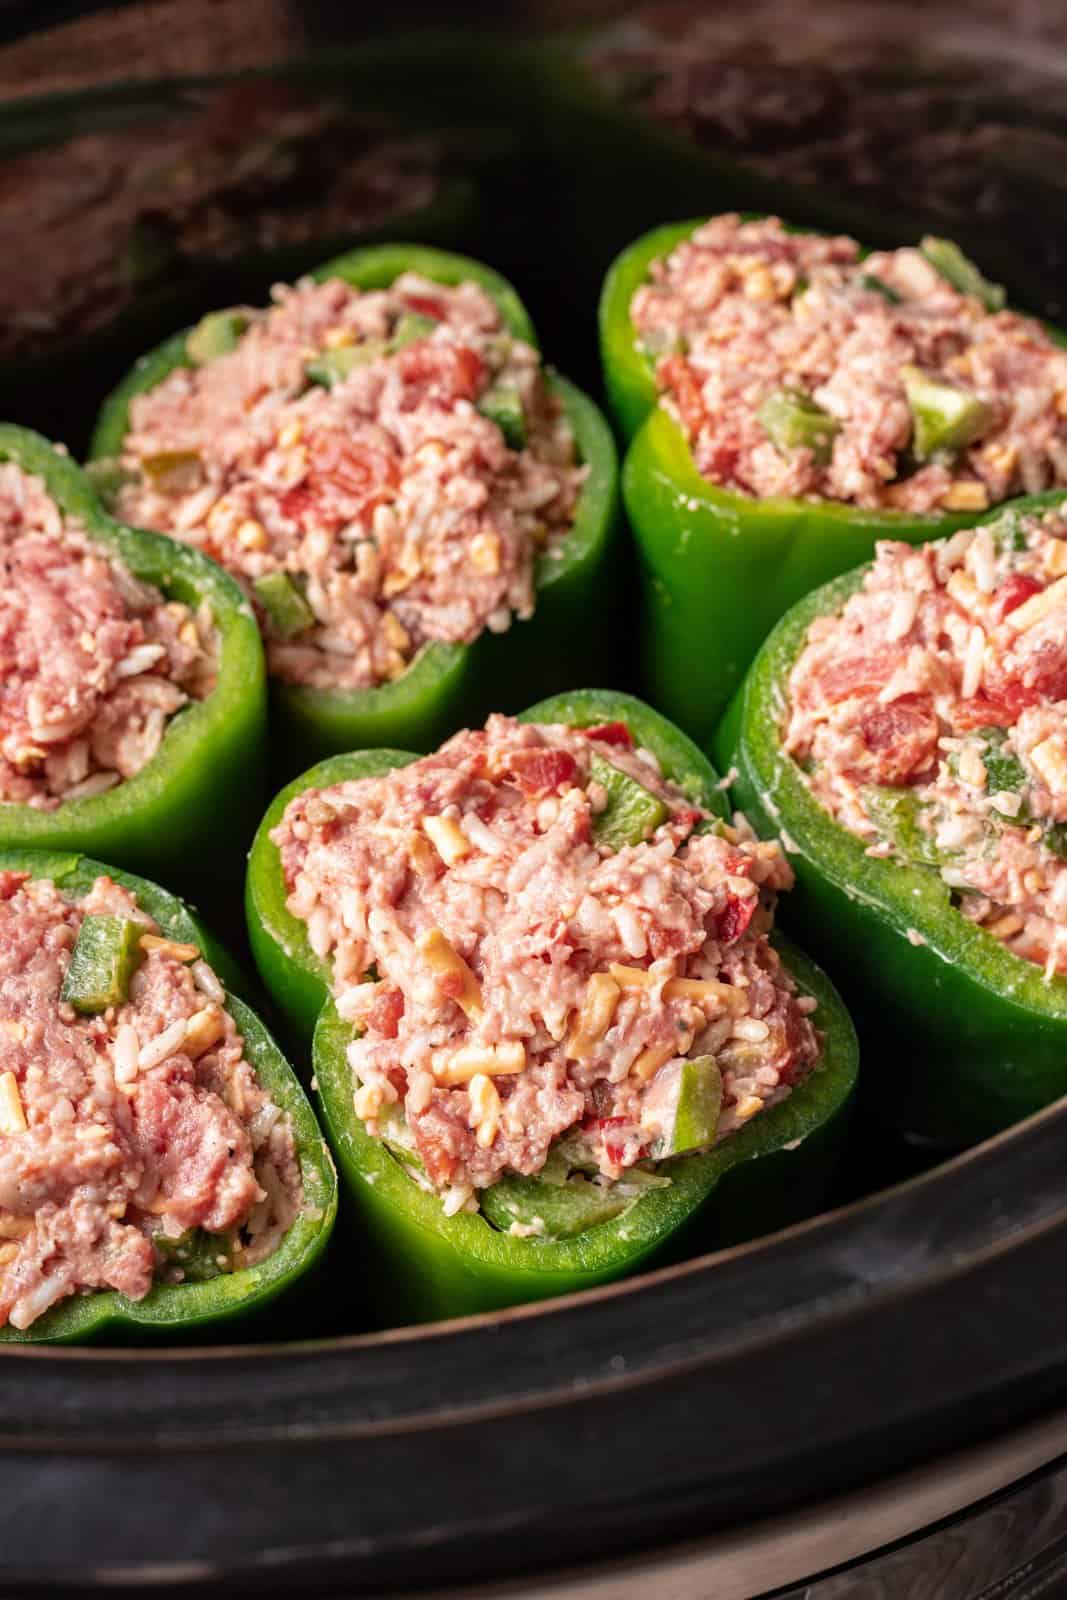 uncooked meat mixture shown stuffed into each green pepper in the slow cooker. 